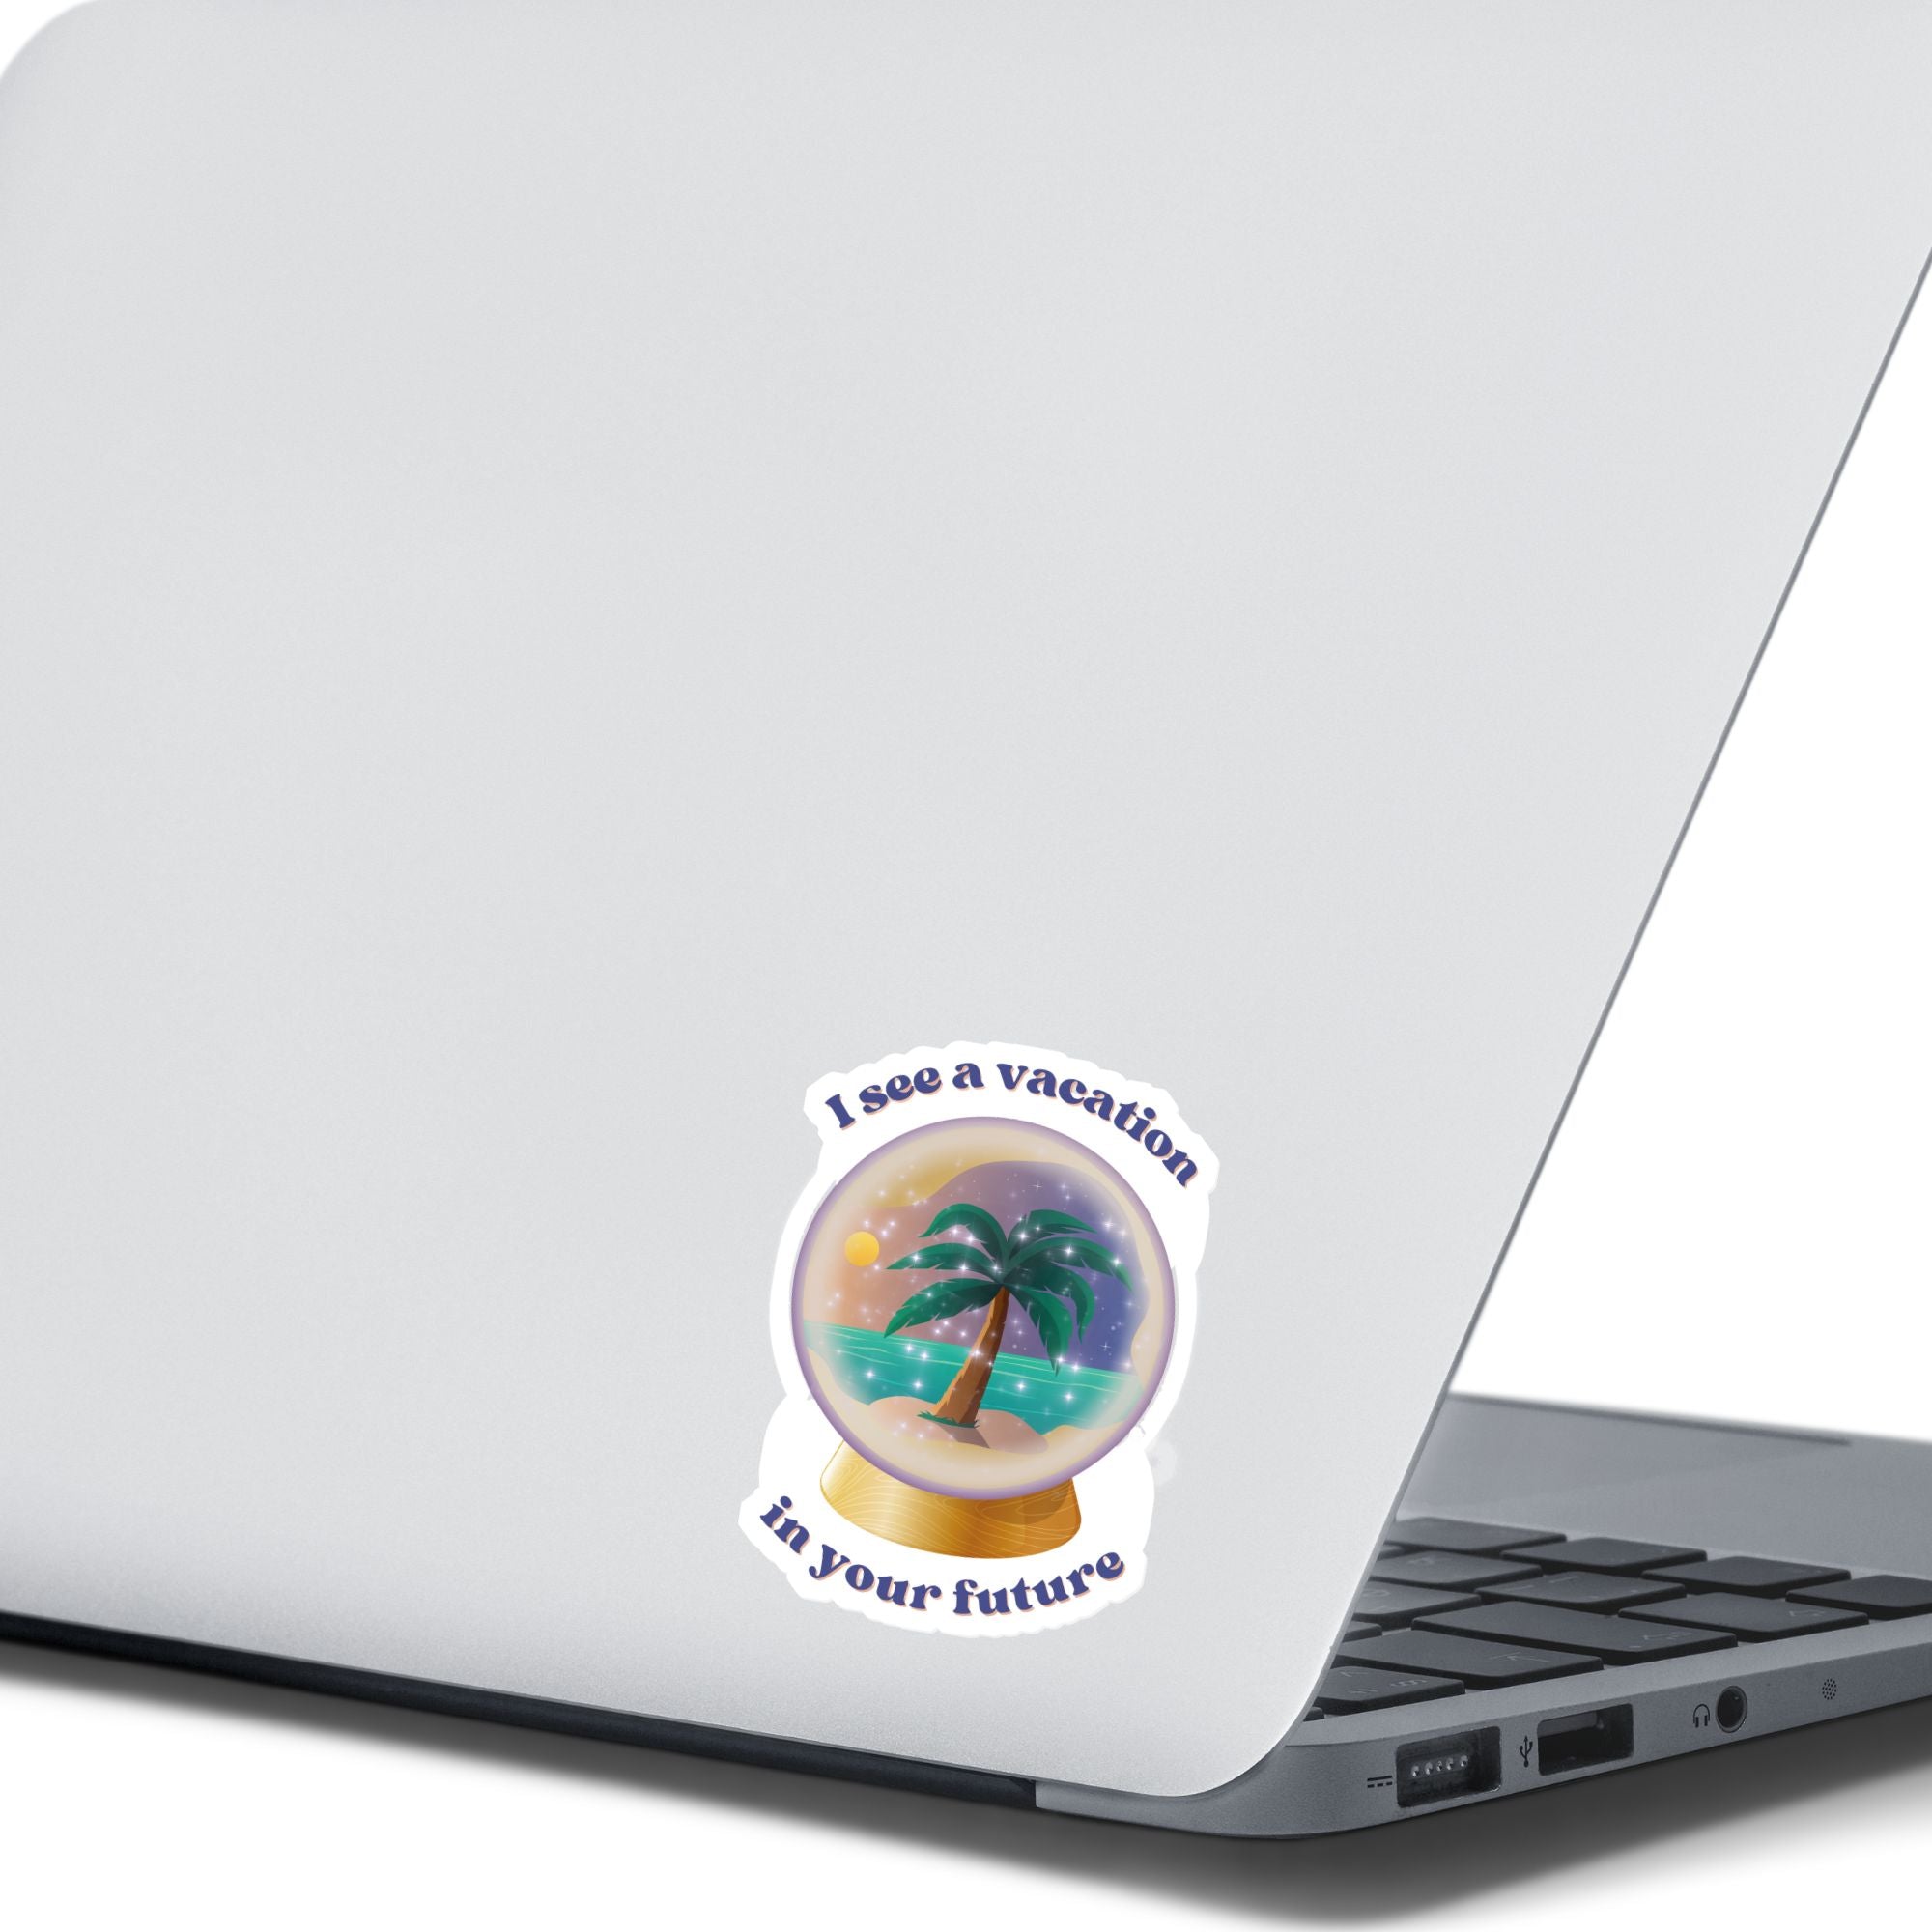 Who wouldn't love a vacation? This individual die-cut sticker shows a crystal ball showing a tropical island and the words "I see a vacation in your future". Outstanding! This image shows the vacation in your future sticker on the back of an open laptop.